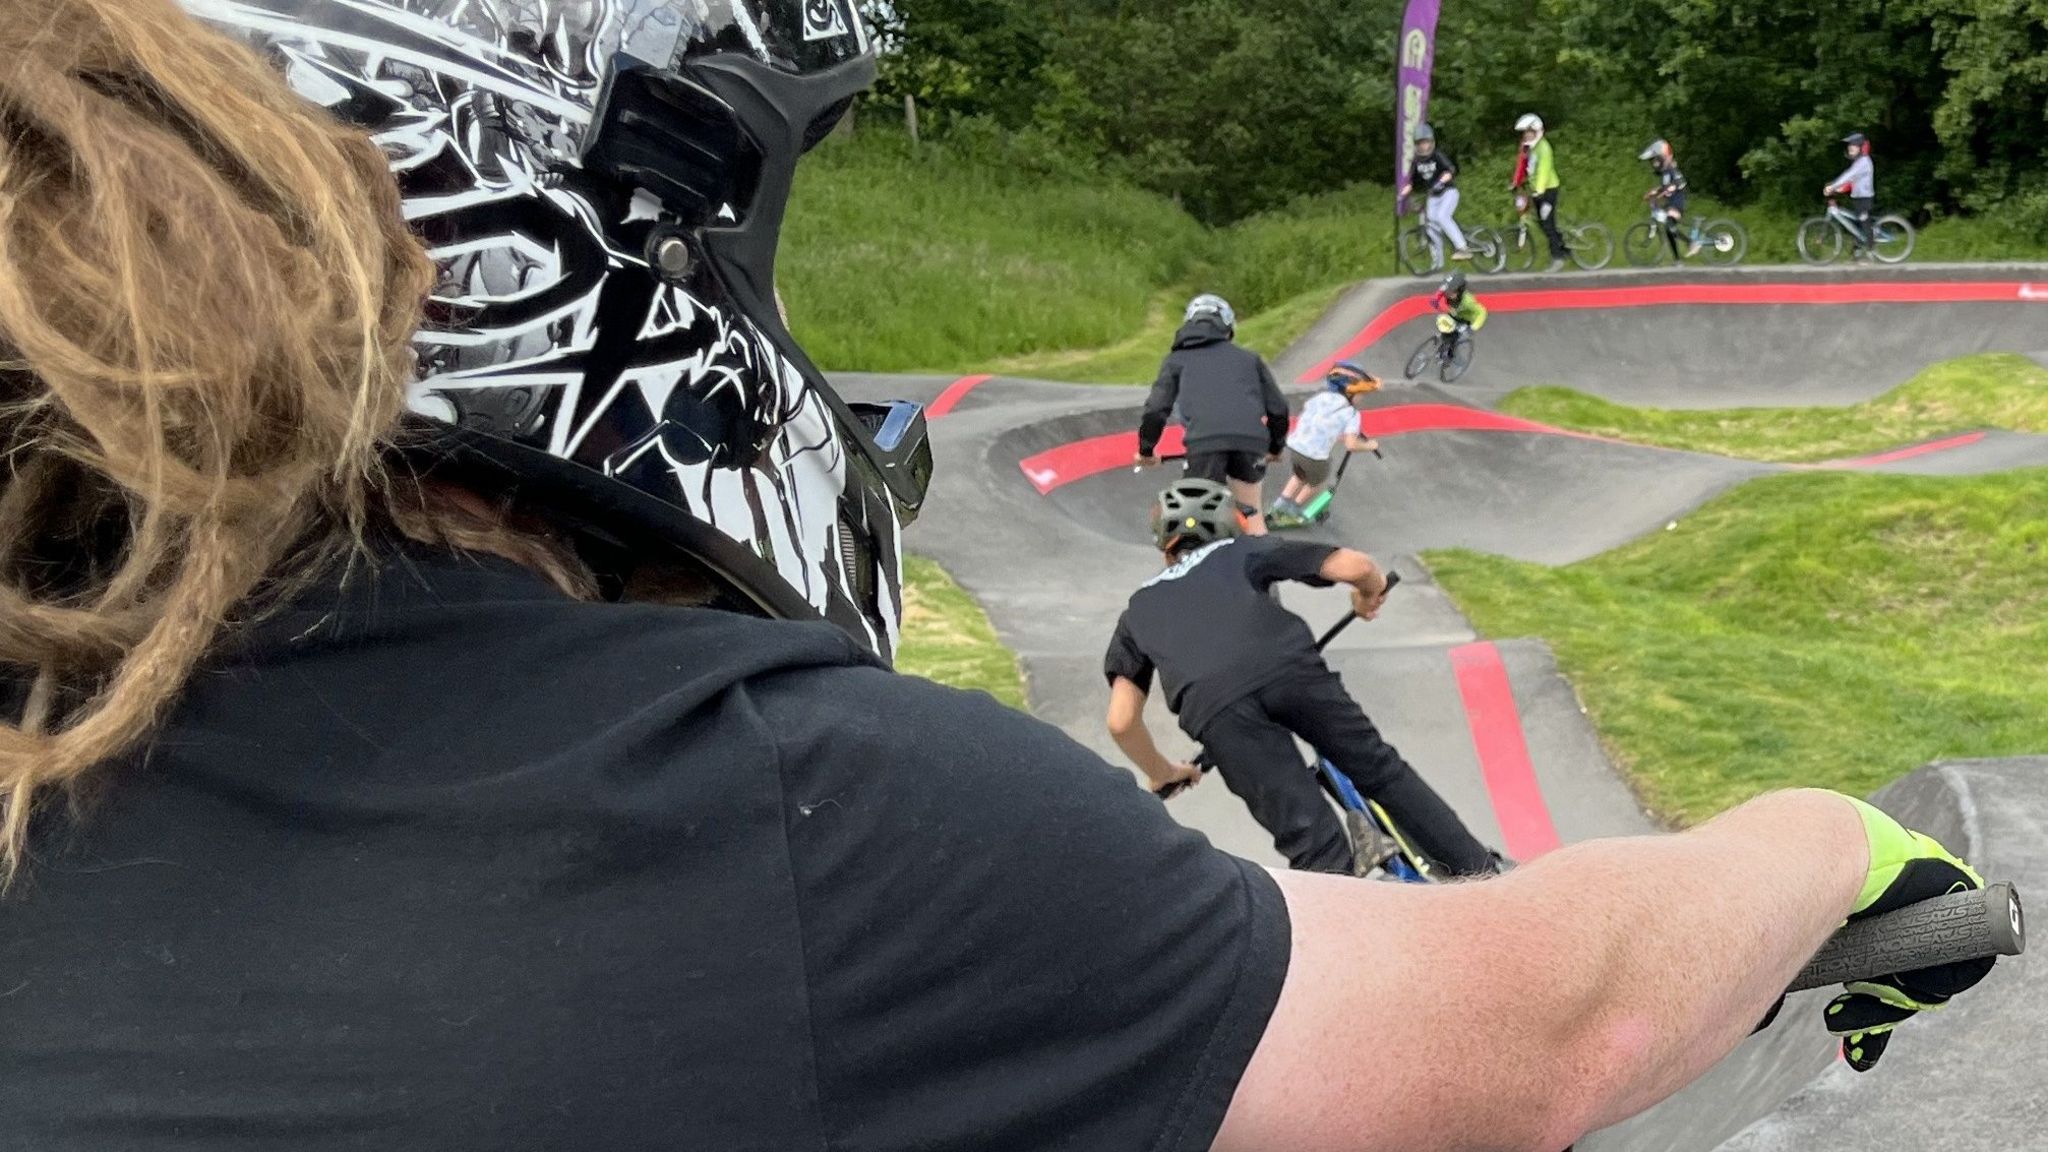 Profile shot of a BMX rider with dreadlocks showing at the back of their crash helmet with riders of all ages on the track in front